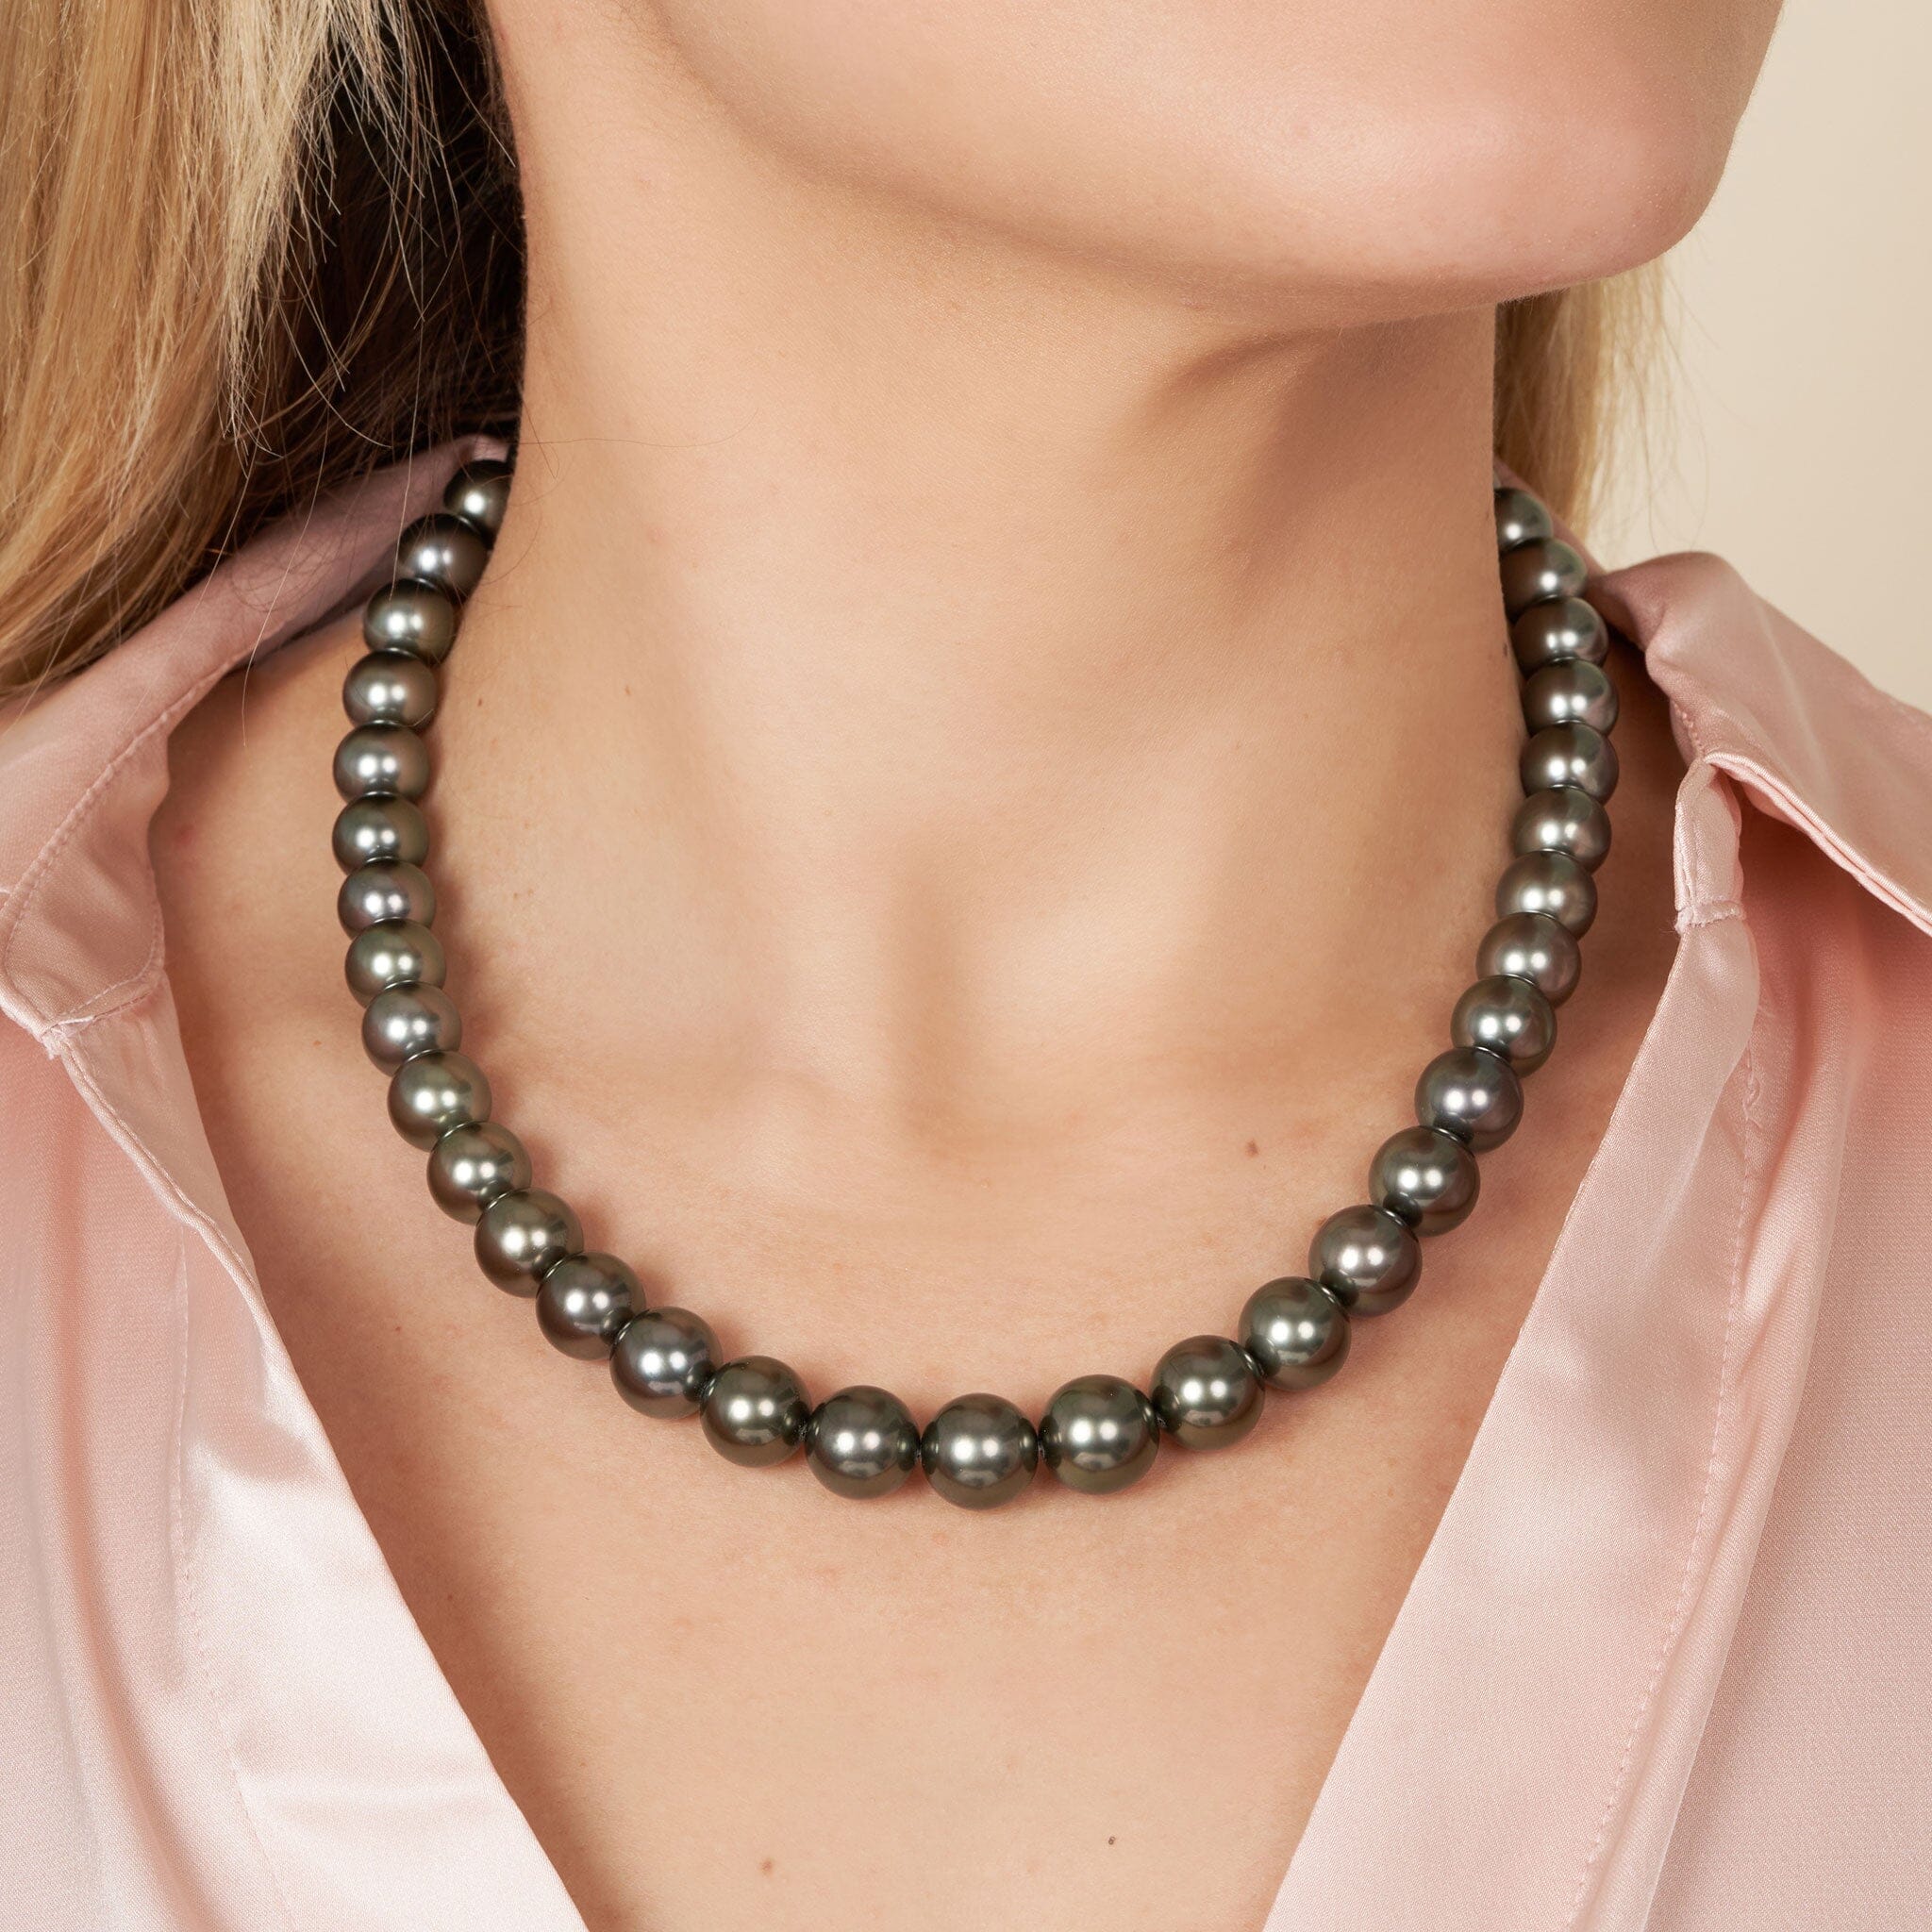 10.0-12.1 mm AAA Tahitian Round Pearl Necklace